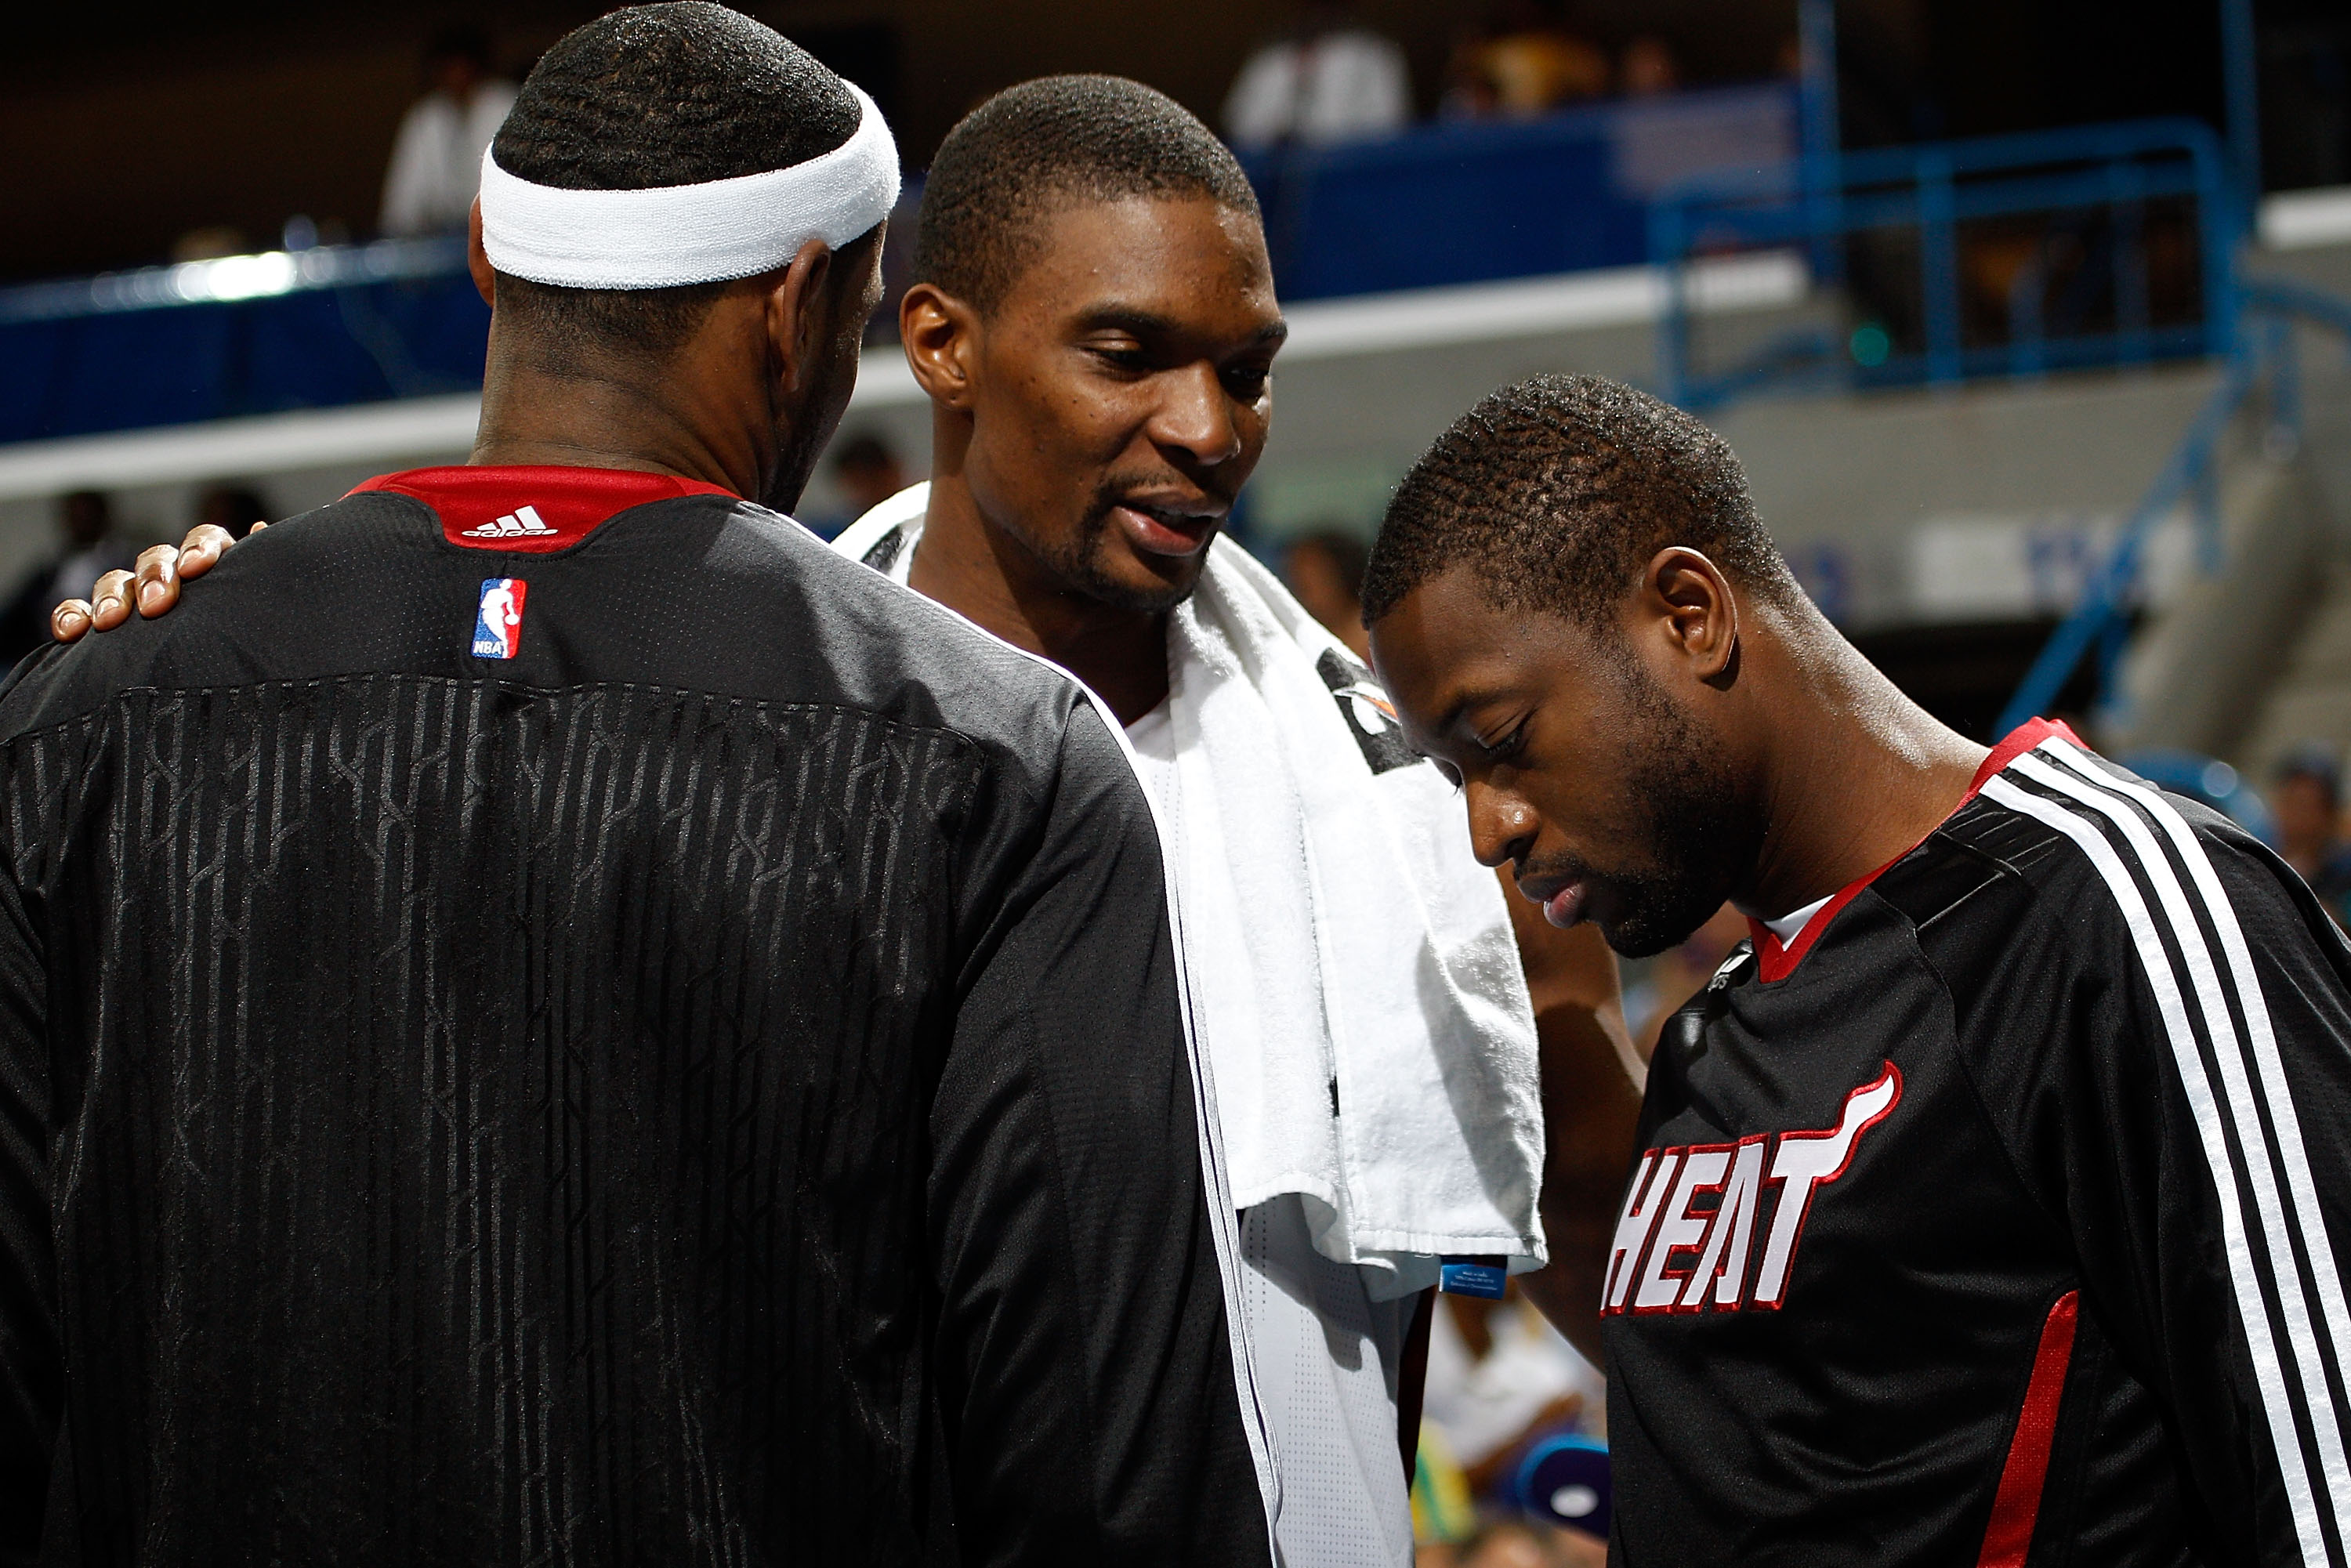 LeBron James on Miami Heat: 'There's a cloud over our team